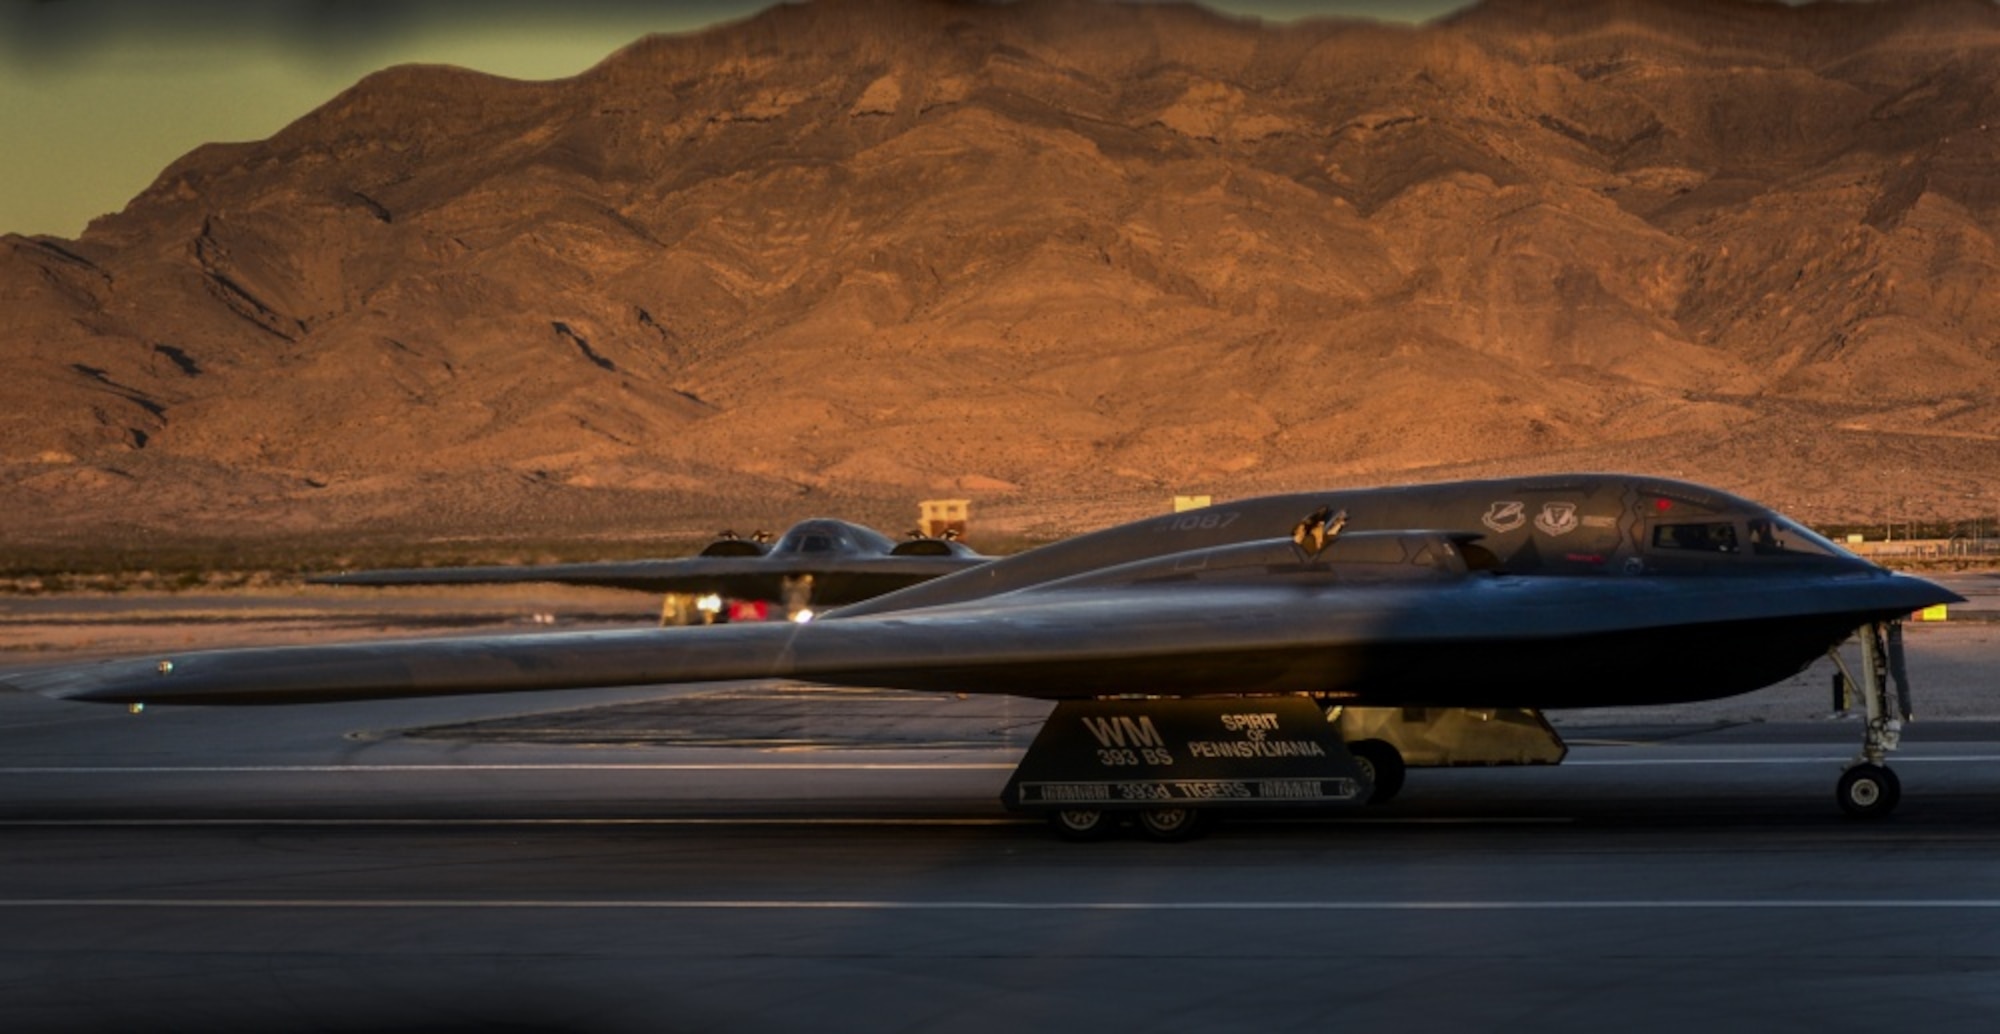 Two B-2 Sprit stealth bombers assigned to the 509th Bomb Wing, Whiteman Air Force Base, Missouri, taxi down the runway as they prepare to takeoff during Deliberate Strike Night at Nellis Air Force Base, Nevada, June 16, 2016. Two B-2s departed Whiteman Air Force Base, Missouri for a transatlantic flight to Libya on Jan. 18 in what would become the B-2’s first combat mission since Operation Odyssey Dawn in 2011. (U.S. Air Force photo by Airman 1st Class Kevin Tanenbaum)